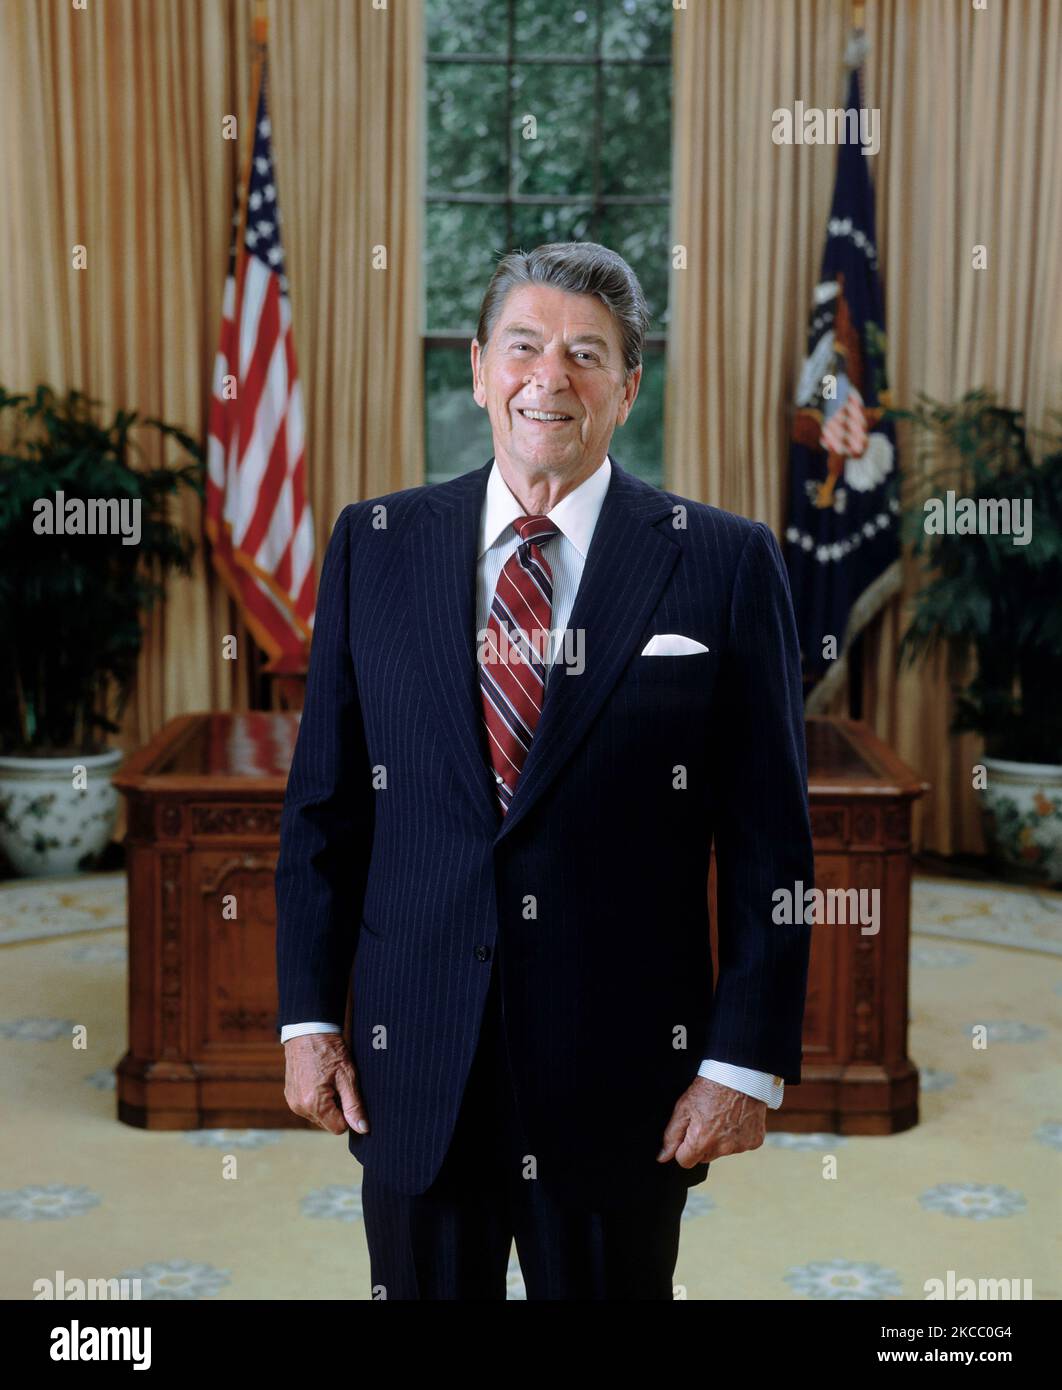 Presidential portrait of Ronald Reagan in the oval office at the White House. Stock Photo